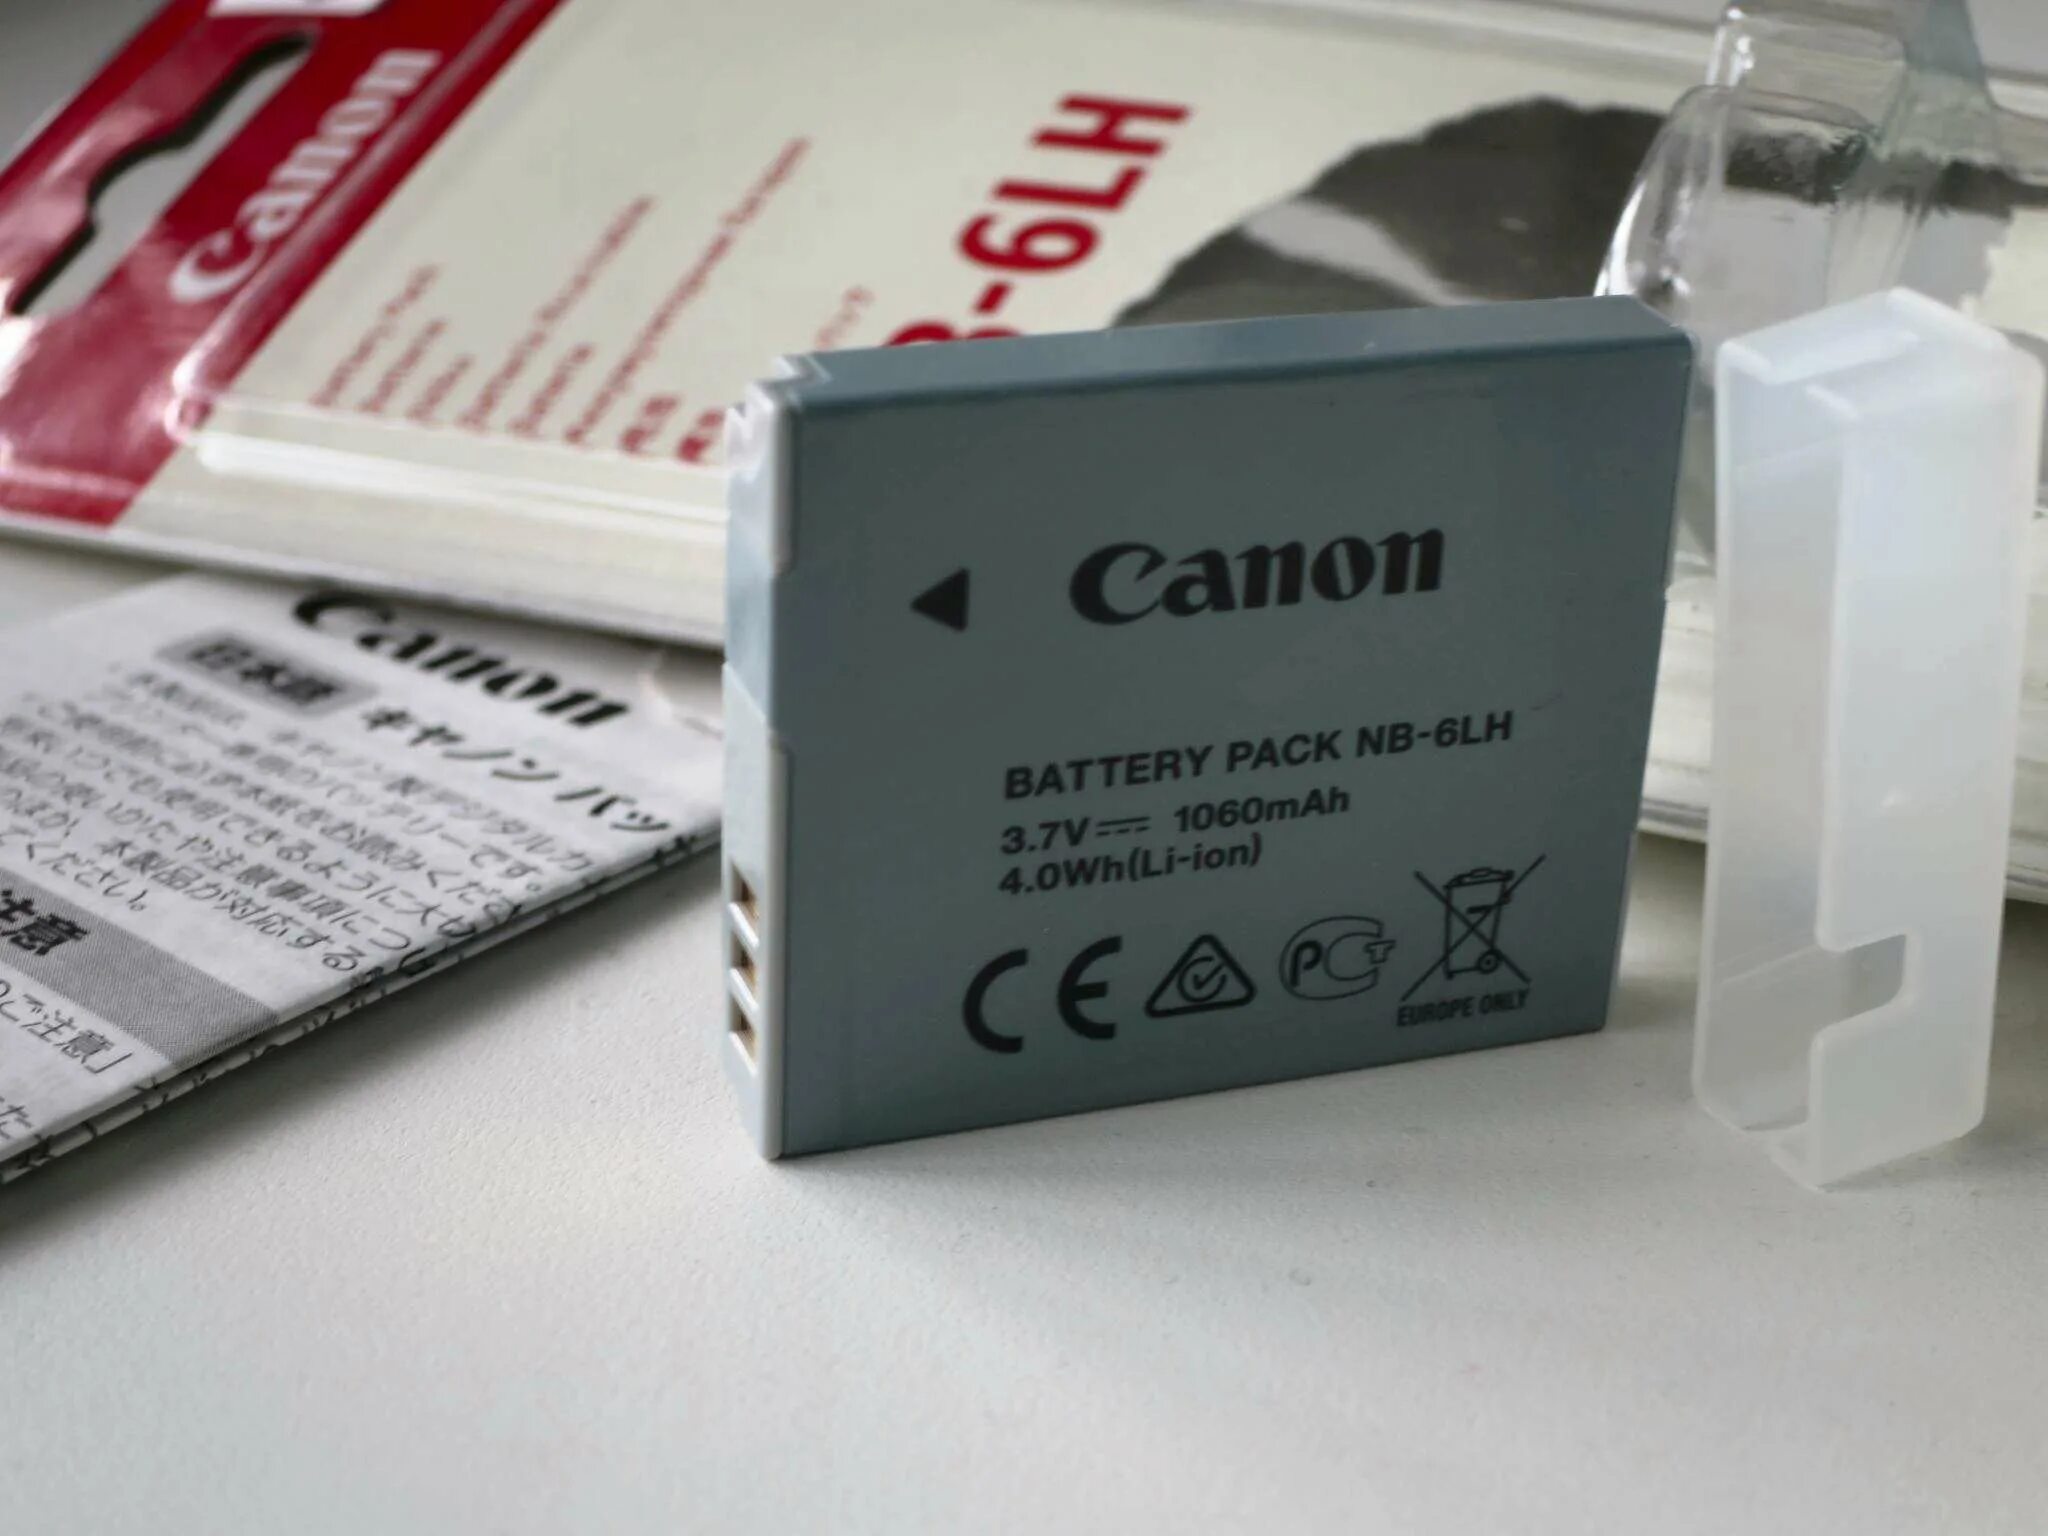 Canon battery pack. Canon nb316. Canon r5 аккумулятор. NB-6m аккумулятор. Аккумулятор Кэнон 200д.